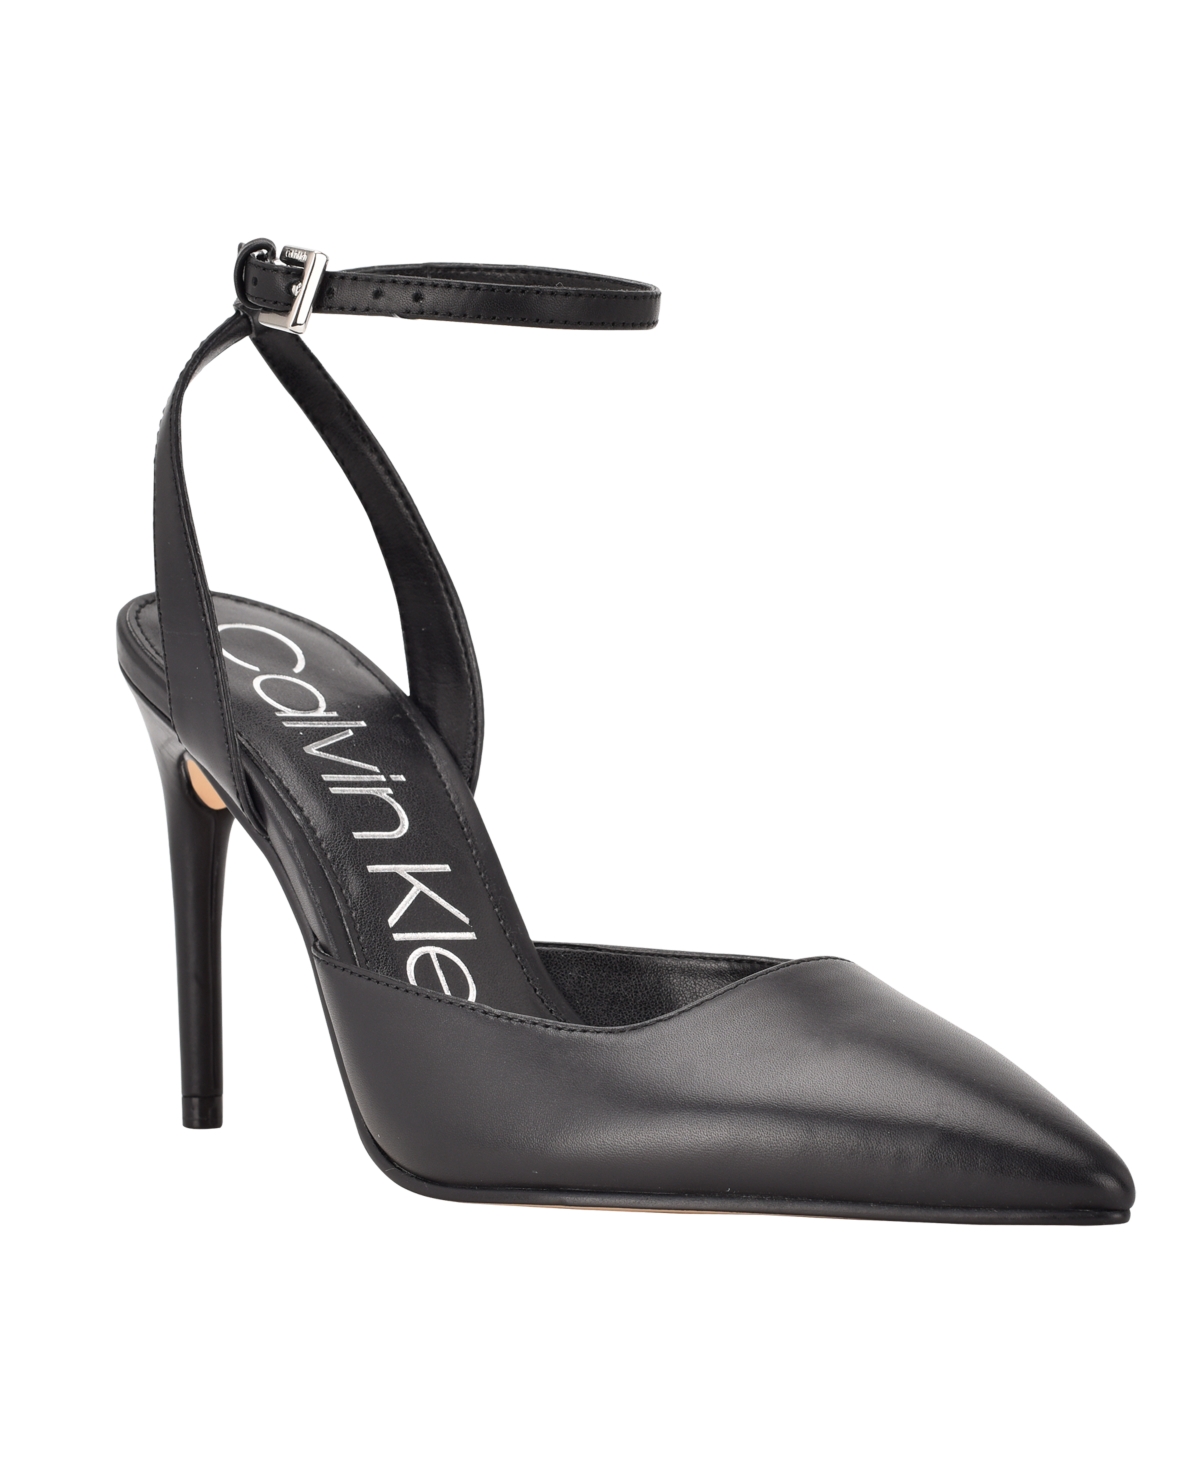 UPC 195972600676 product image for Calvin Klein Women's Dona Ankle Strap Pumps Women's Shoes | upcitemdb.com